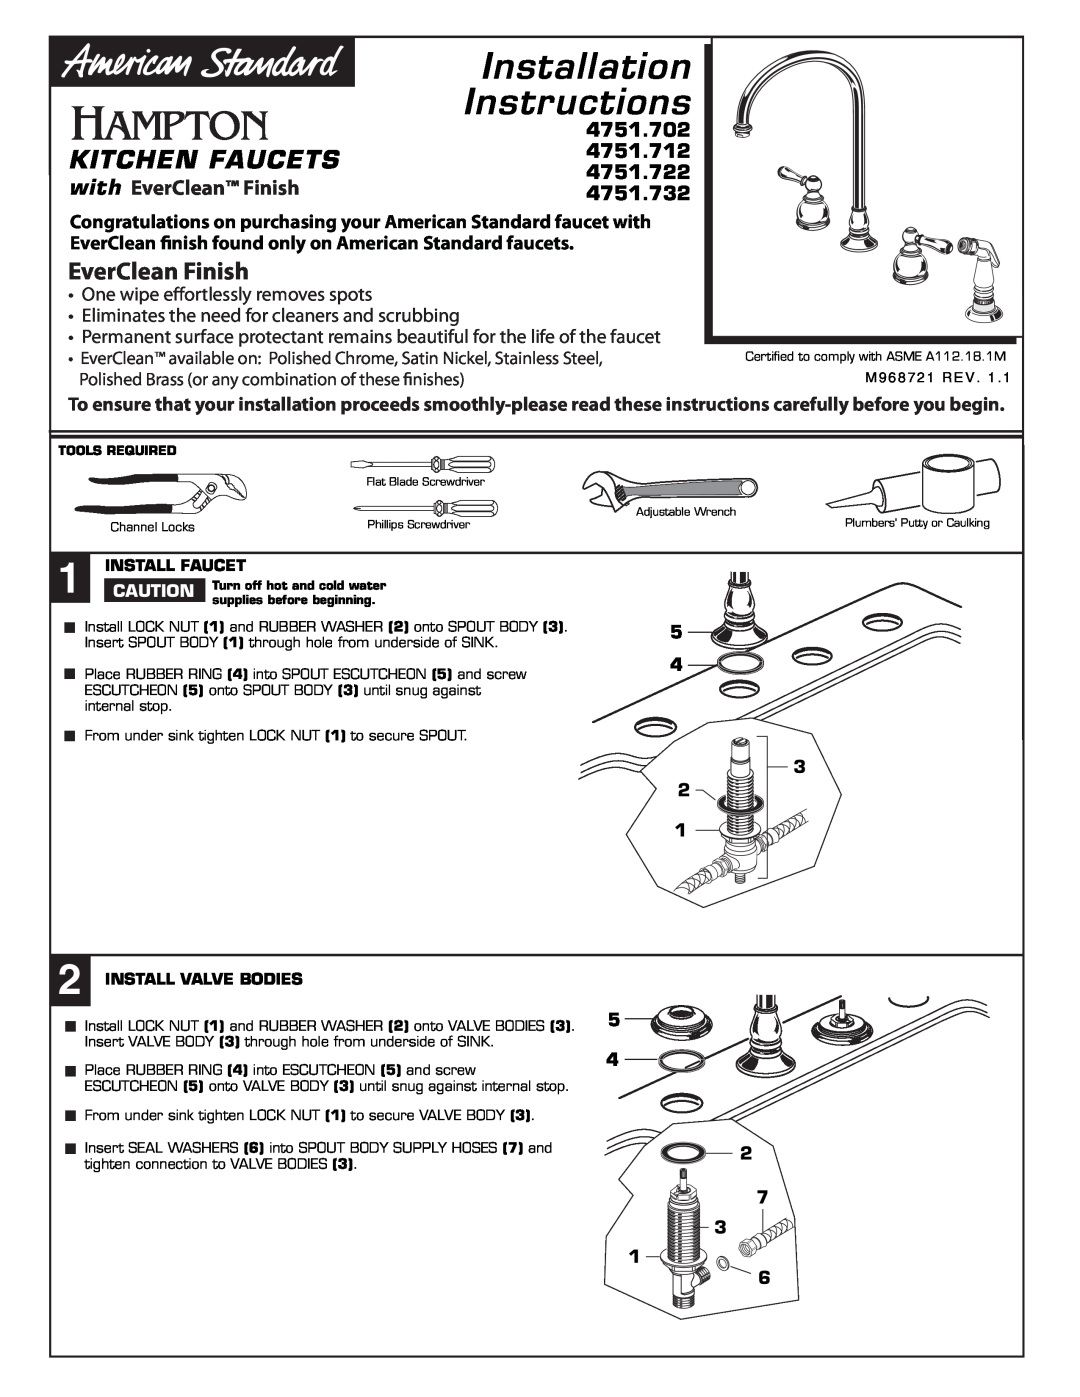 American Standard 4751.722 installation instructions 5 4 2 7, Install Faucet, Install Valve Bodies, Kitchen Faucets 